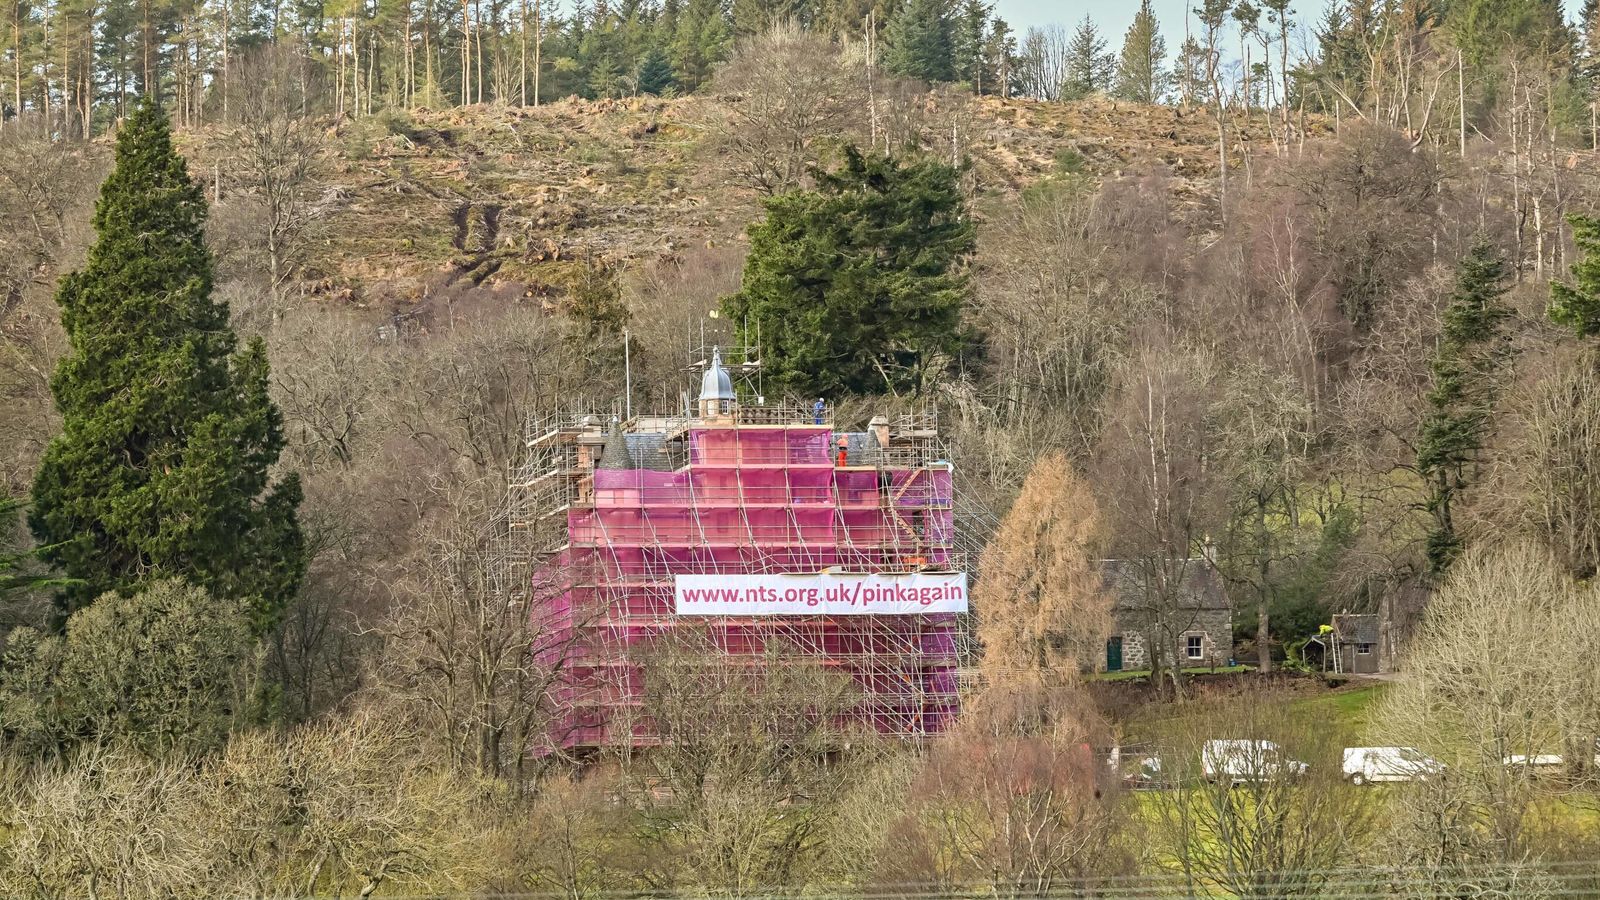 Scottish castle with Disney connections covered in pink for major restoration